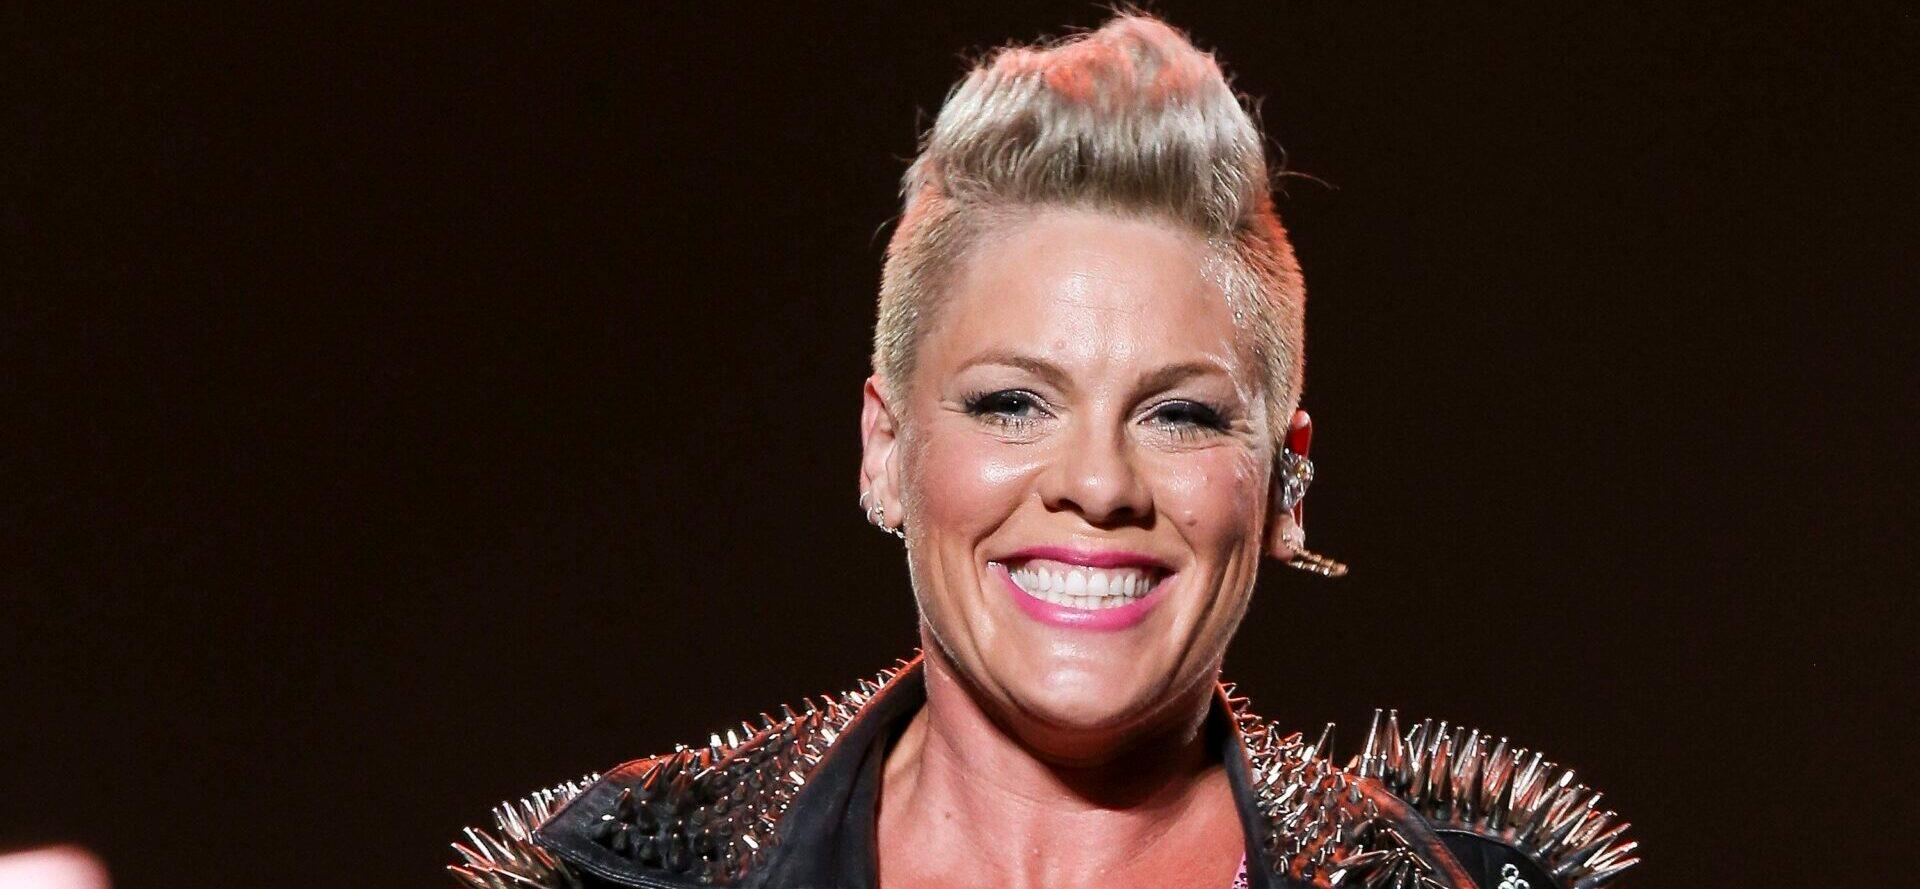 P!nk Receives Backlash For Being ‘Entitled’ After Latest Announcement